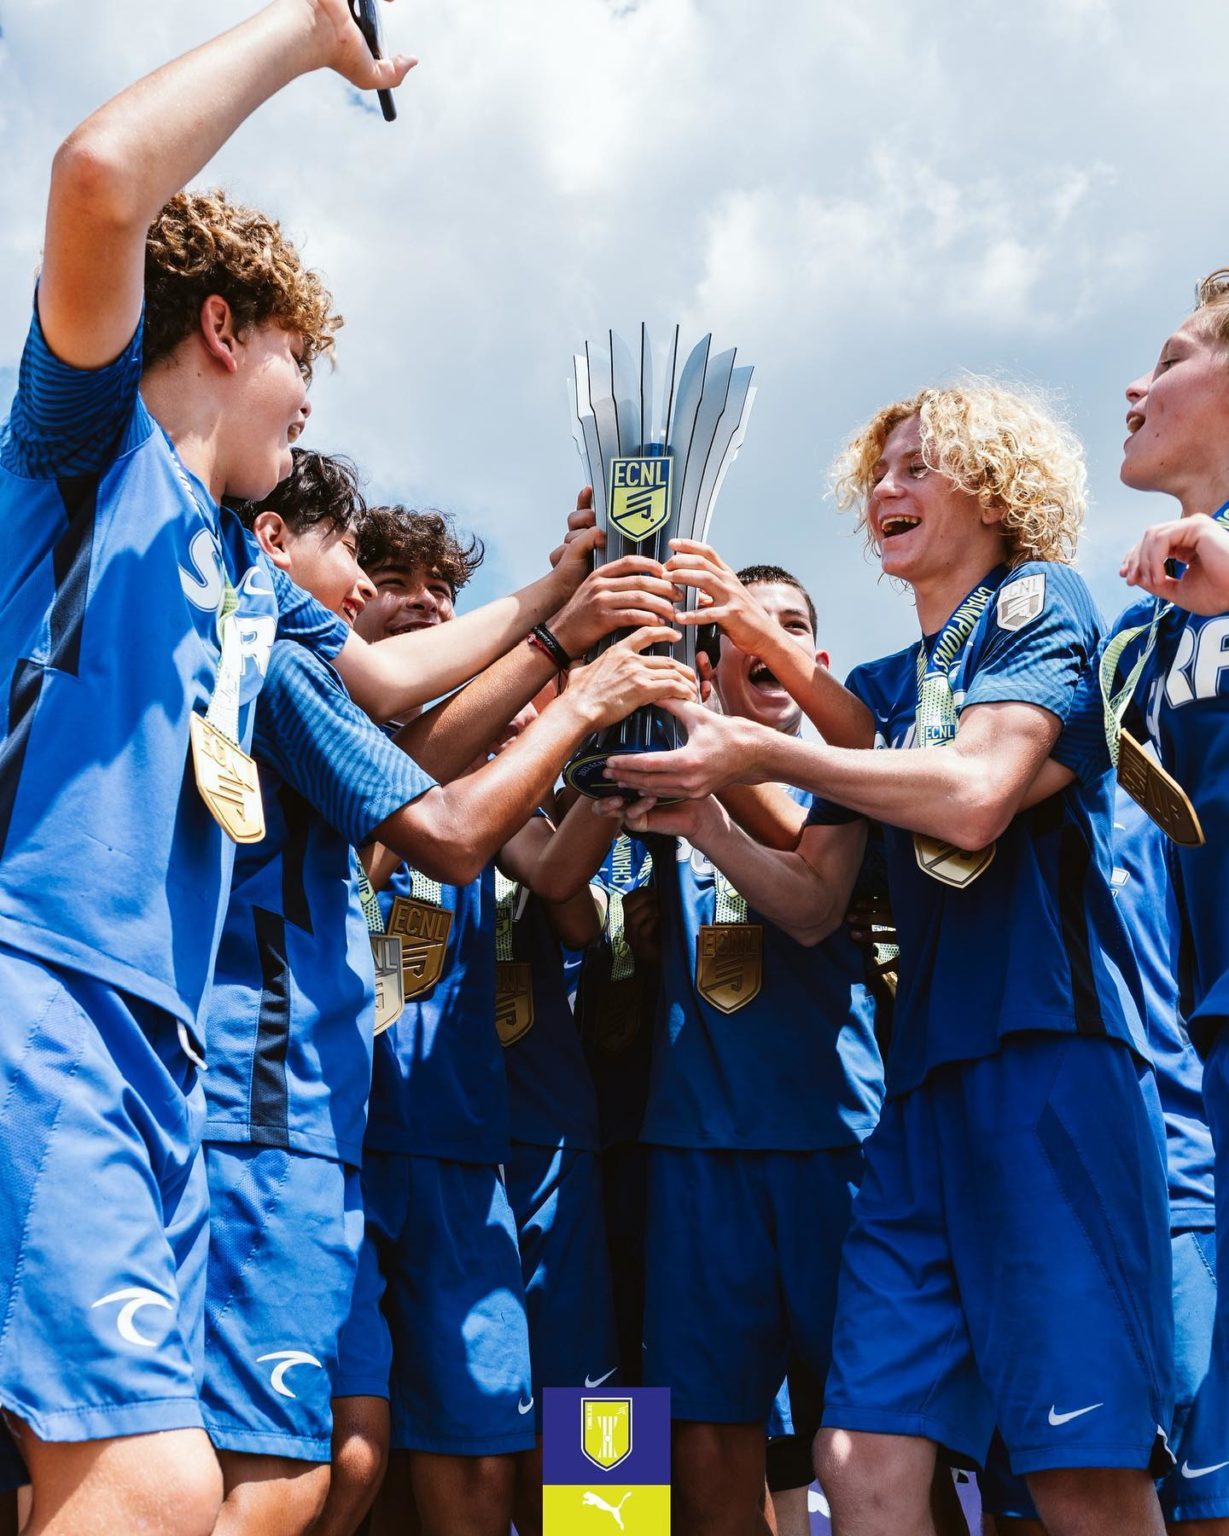 ECNL Boys National Finals conclude with crowning of U13U17 national